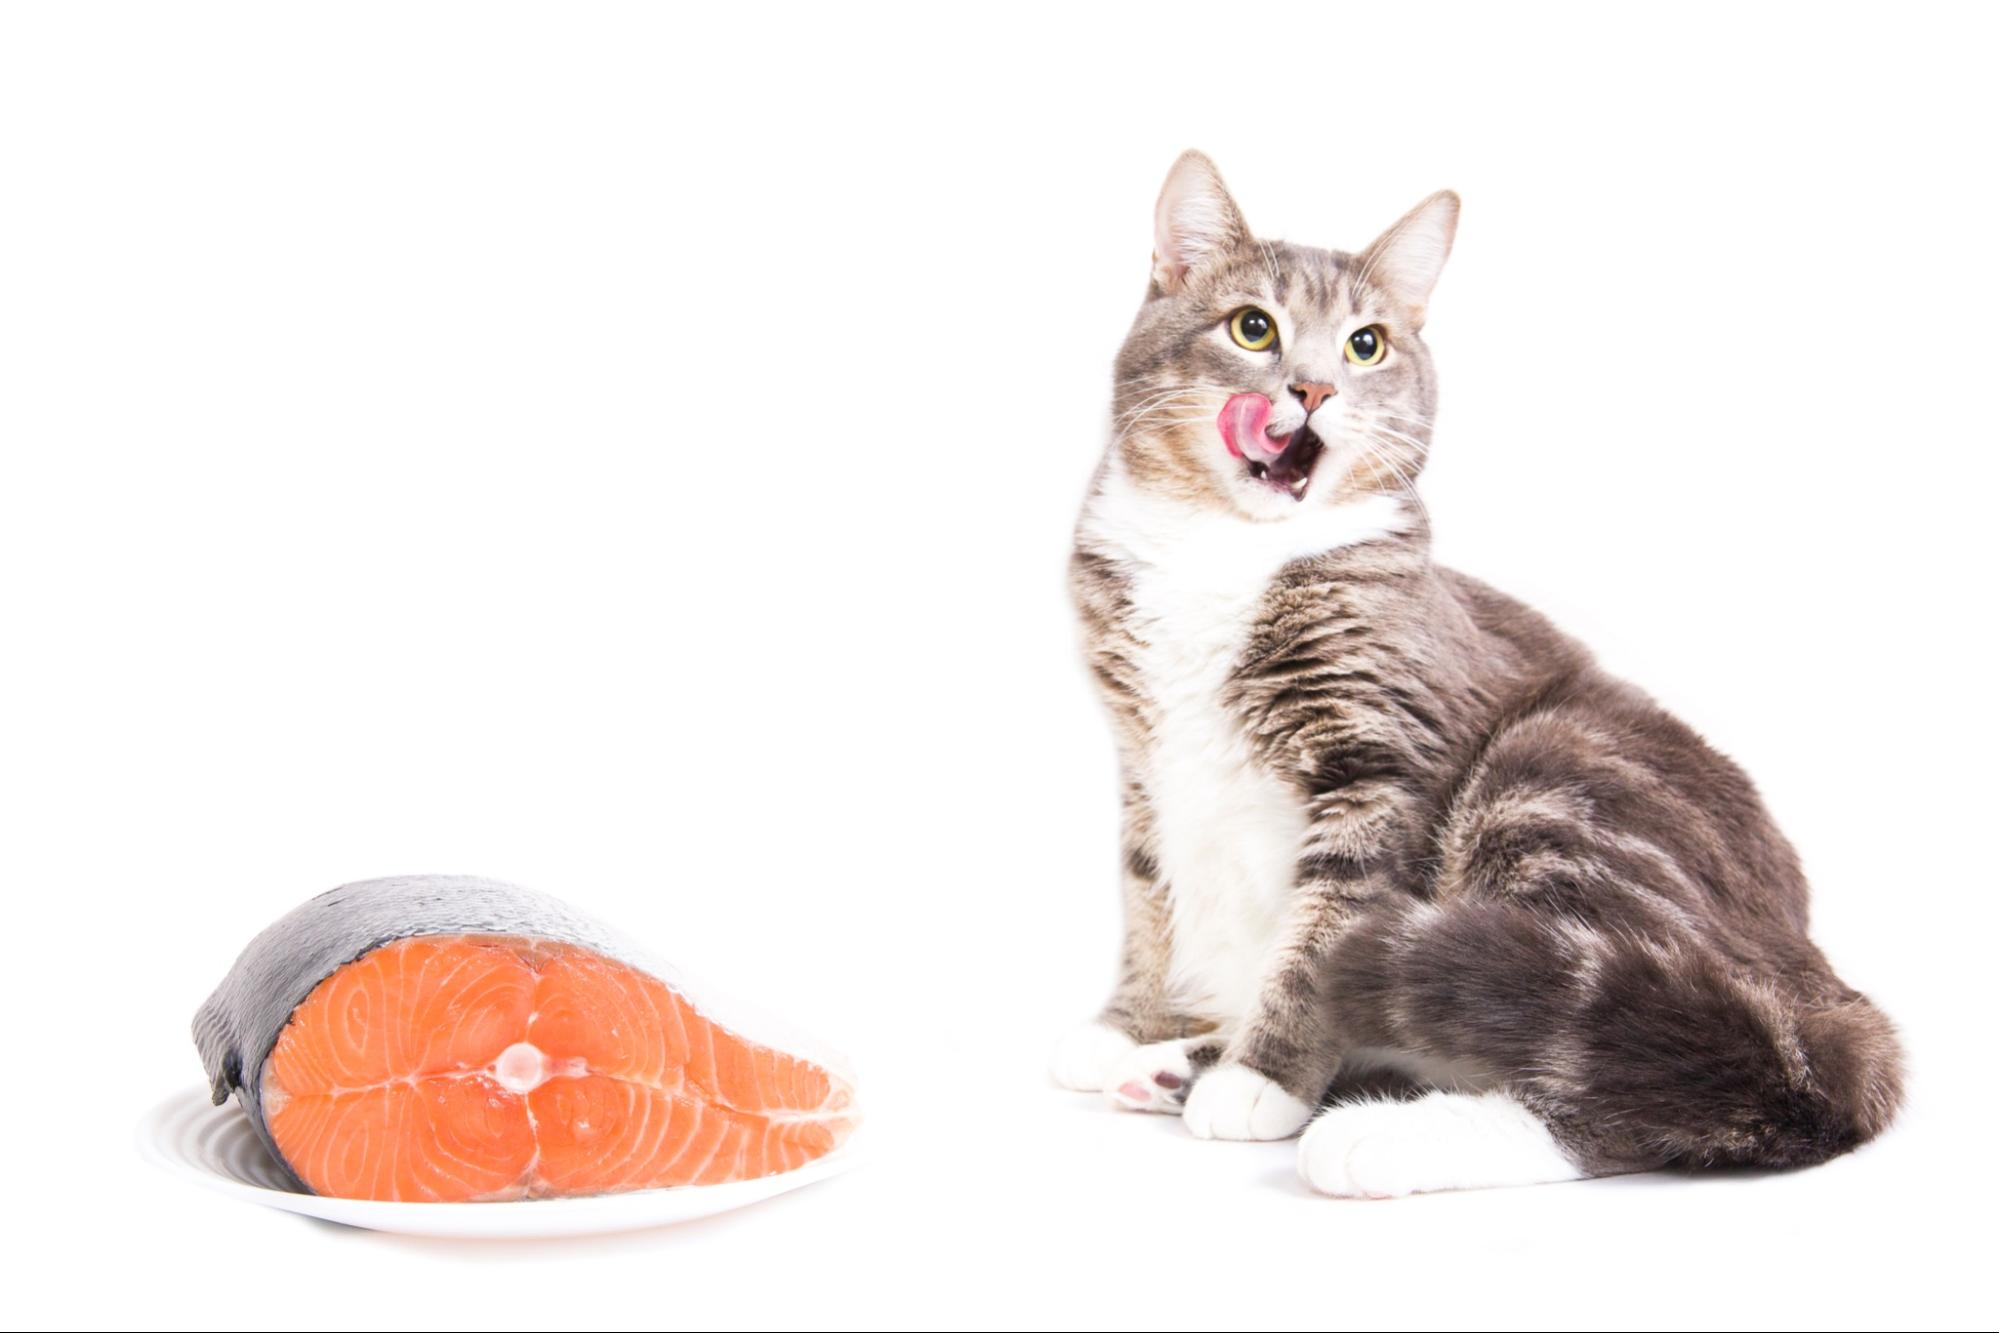 A gray cat about to eat a large plate of salmon